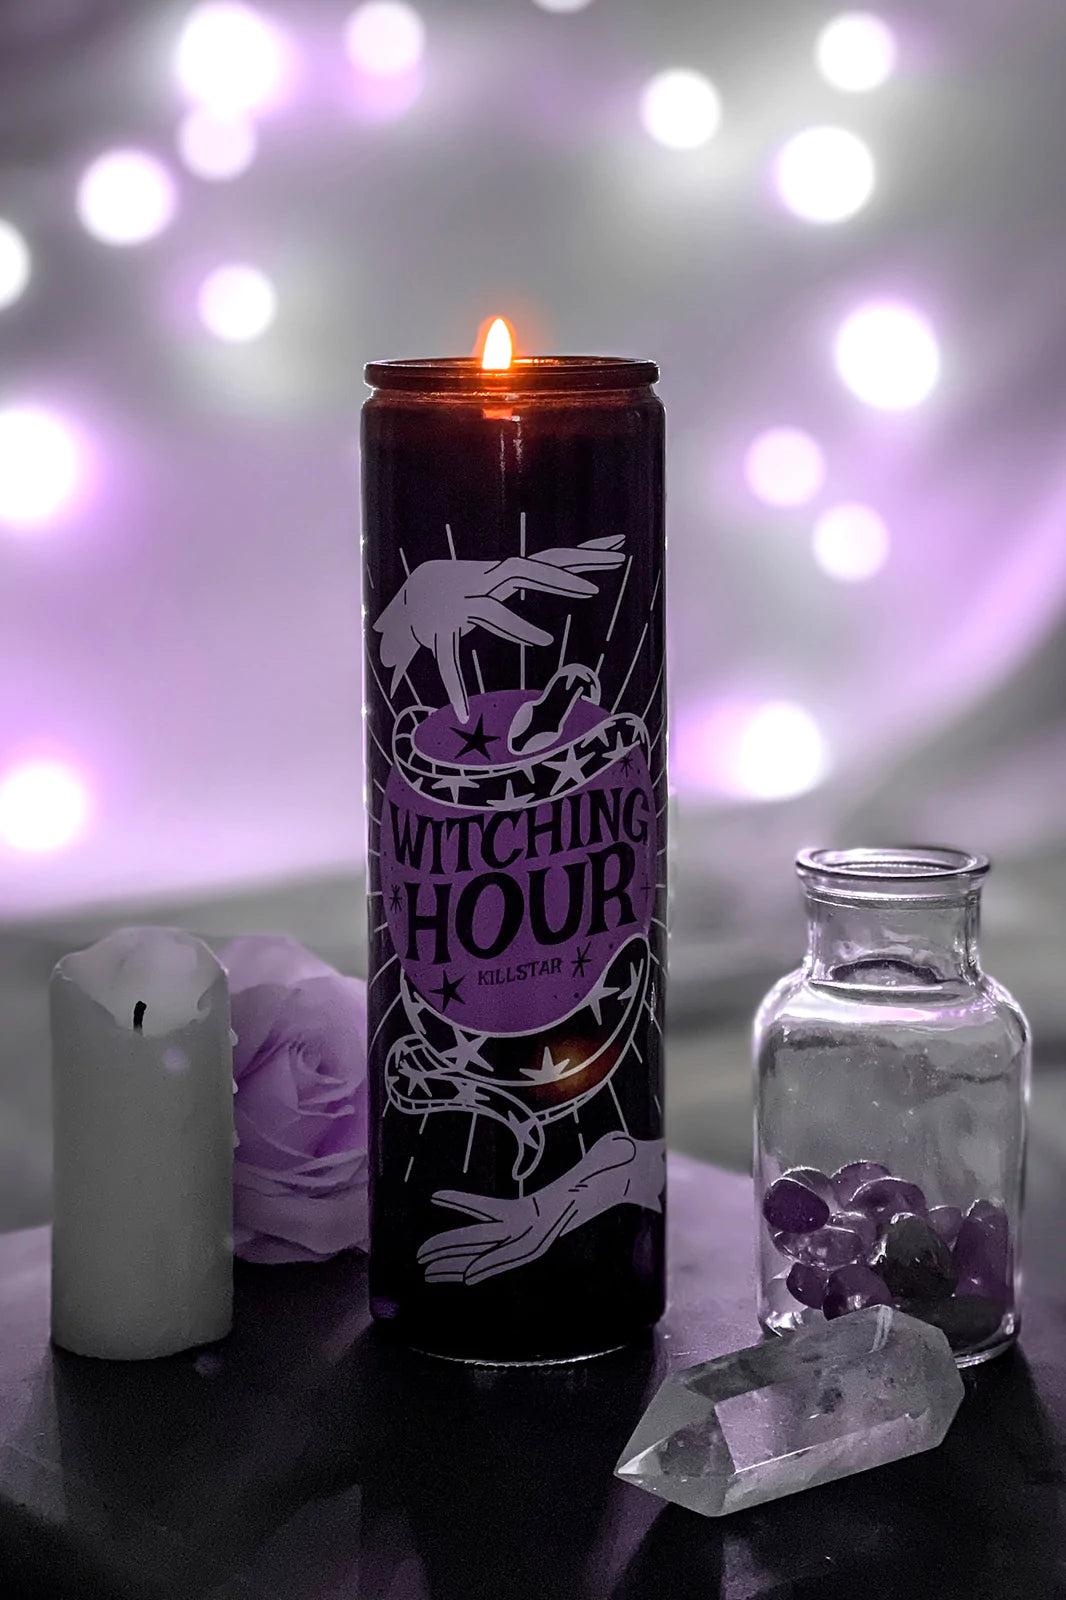 Killstar Witching Hour Candle - Kate's Clothing